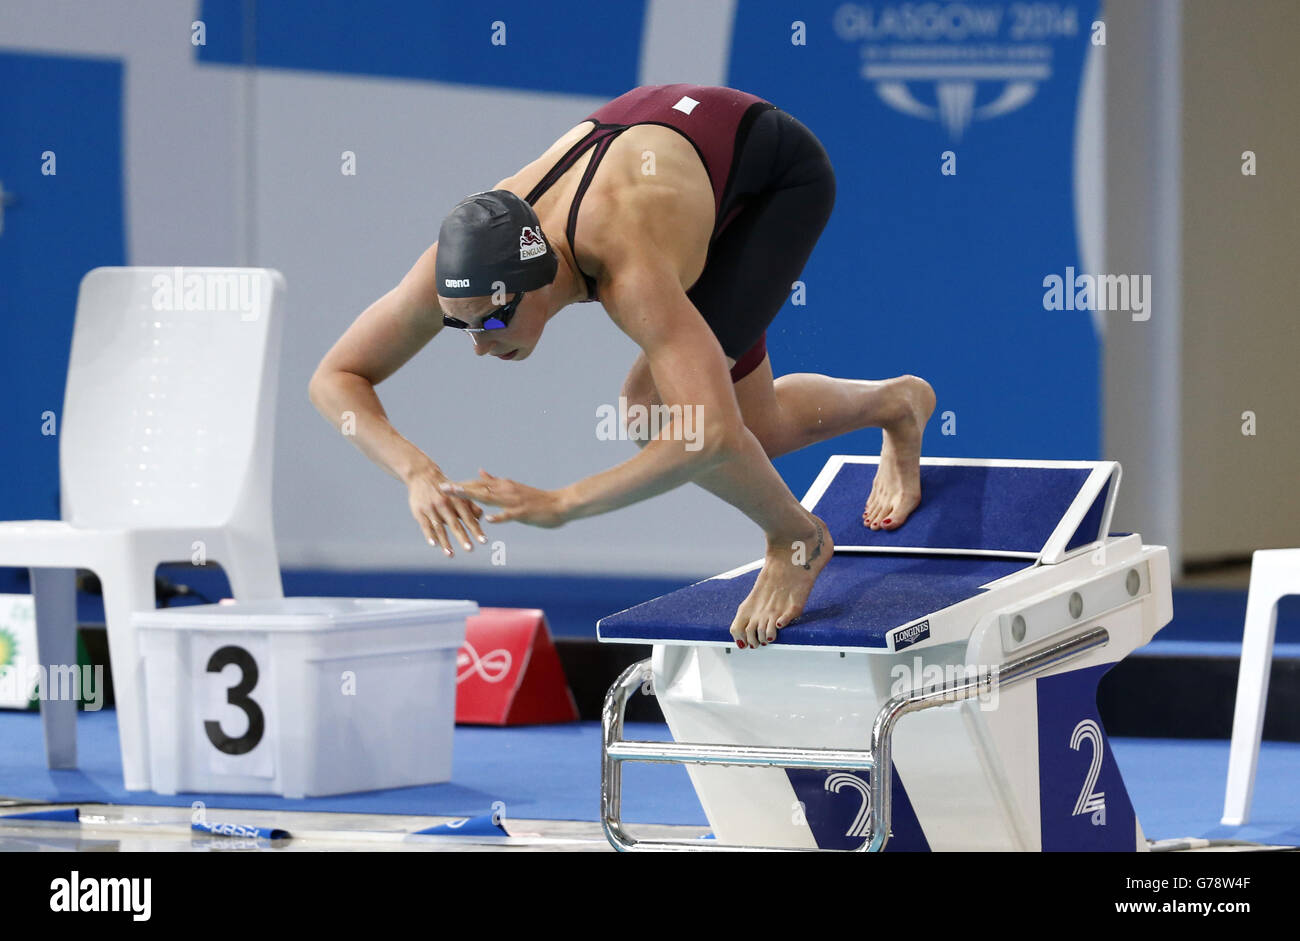 England's Amy Smith during the Women's 100m Freestyle Semi-final 1, at Tollcross Swimming Centre, during the 2014 Commonwealth Games in Glasgow. Stock Photo